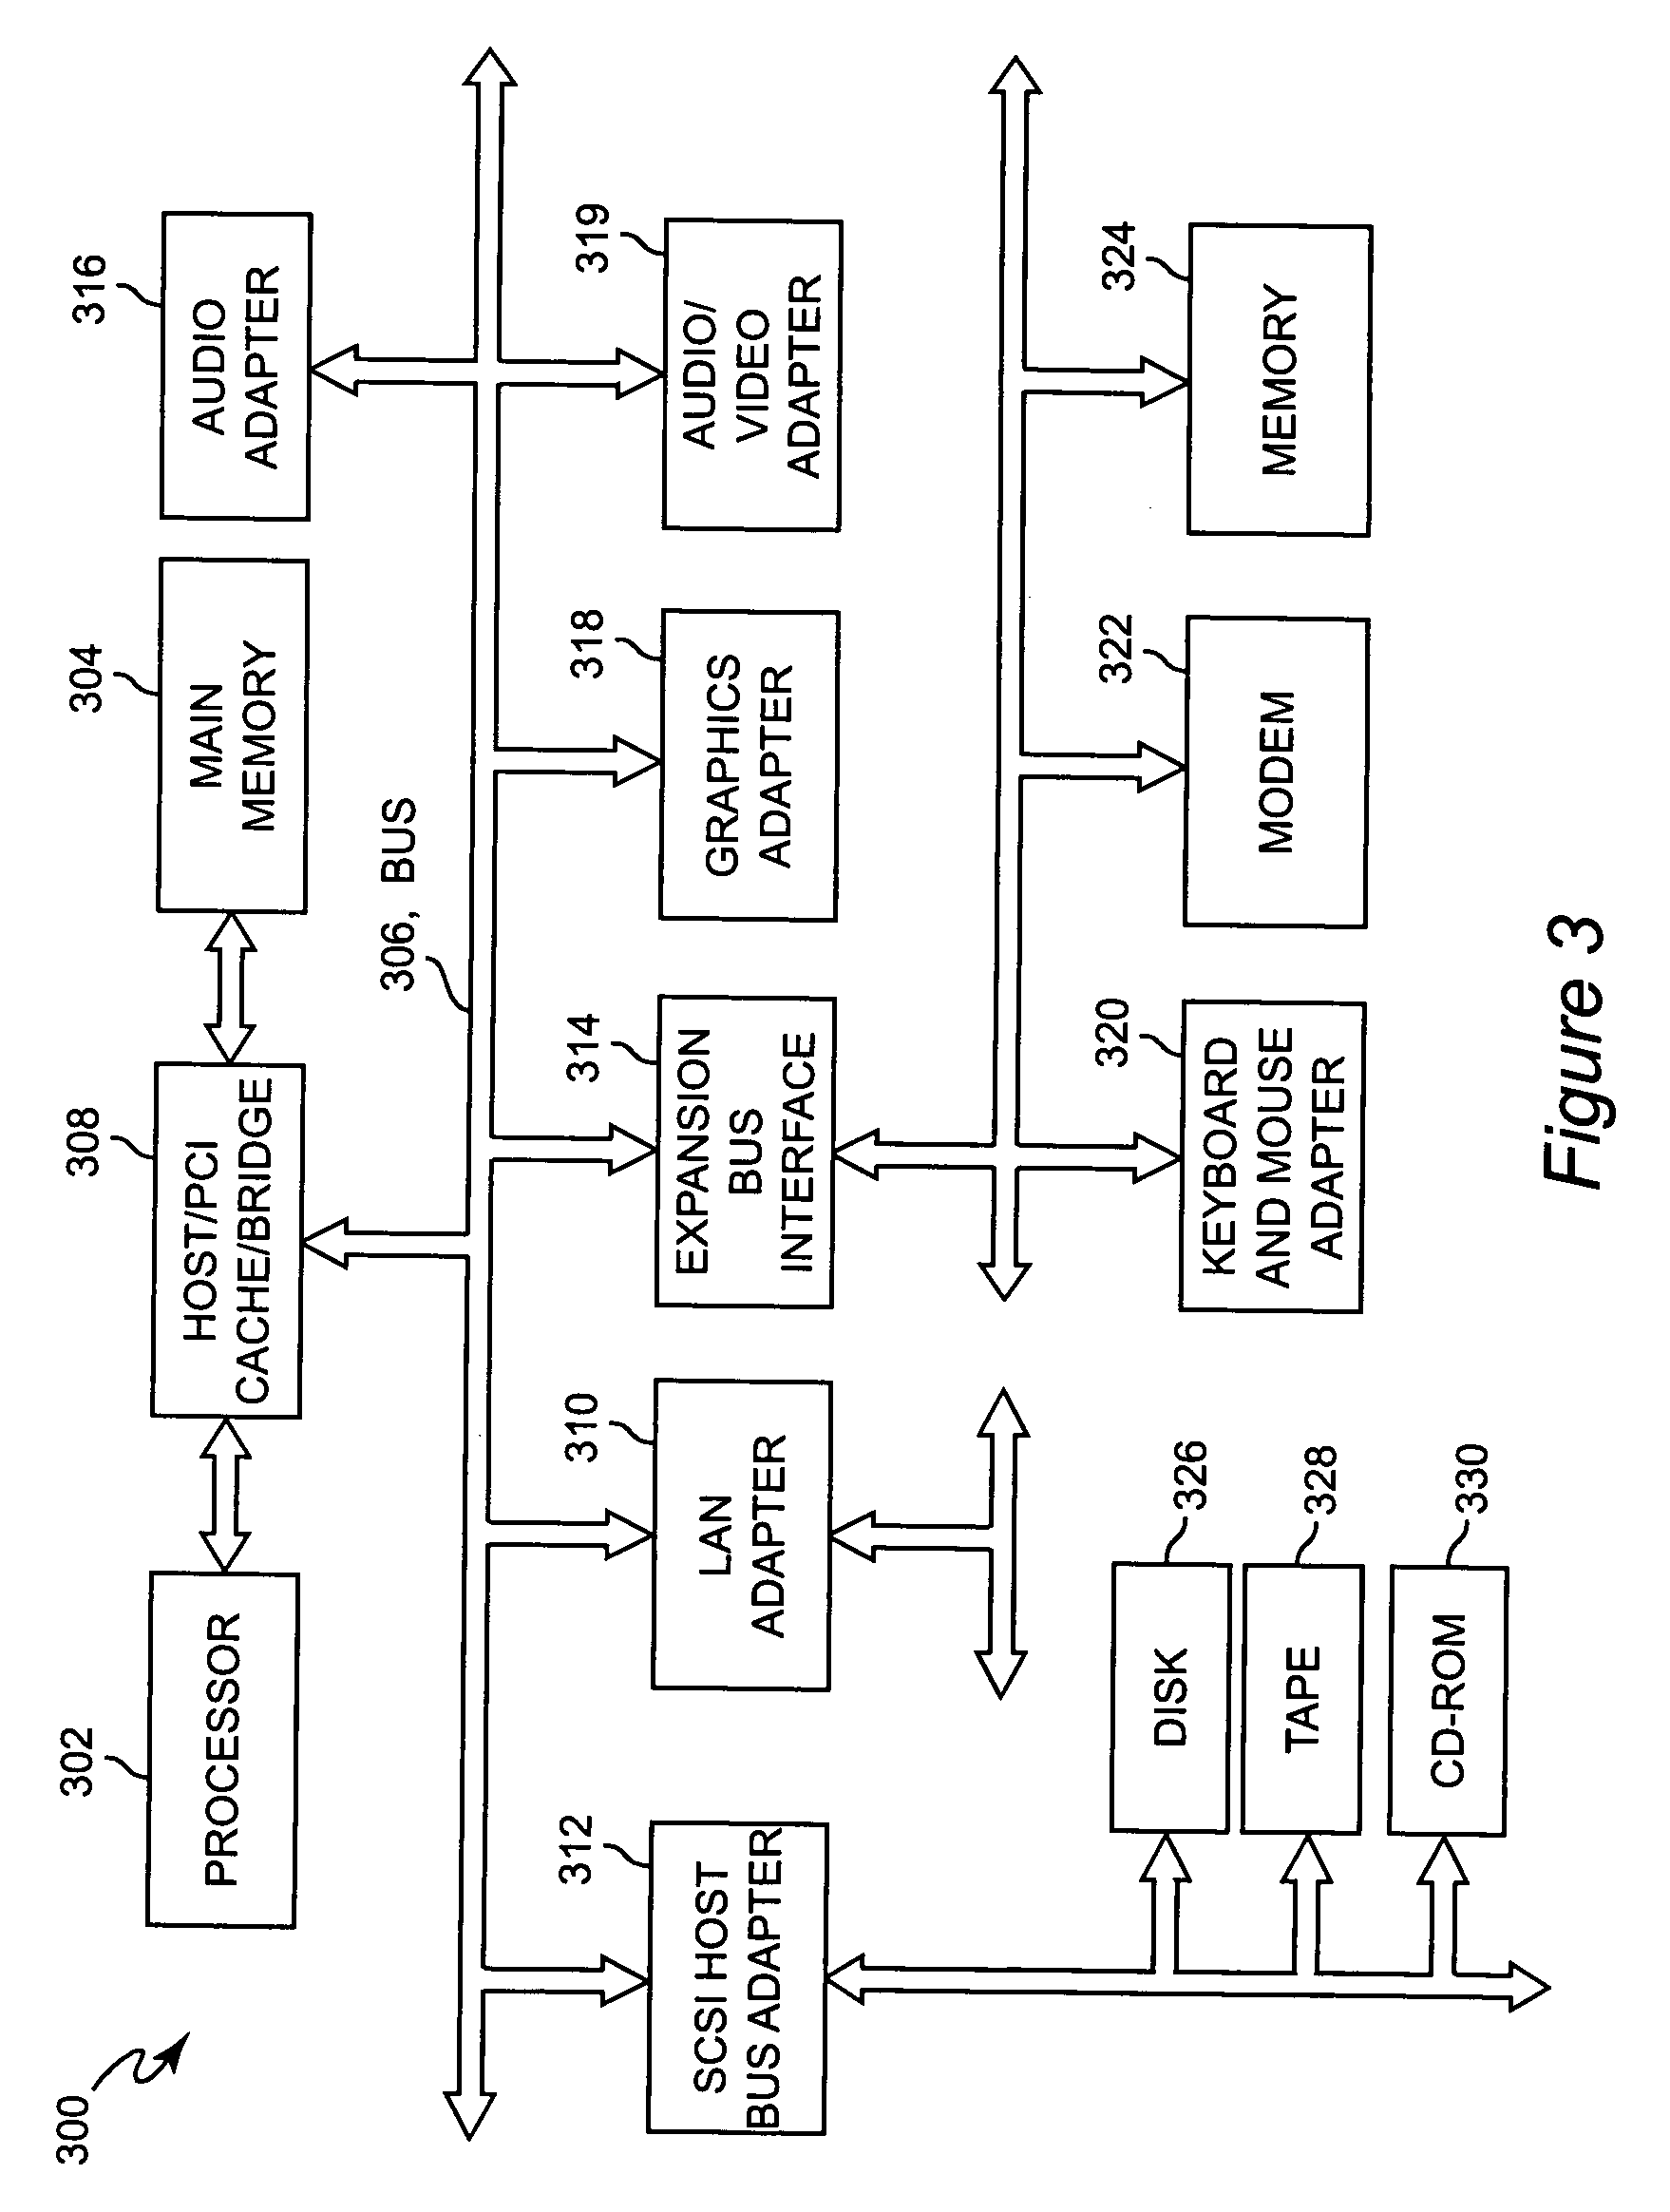 Method and system for determining offering combinations in a multi-product environment